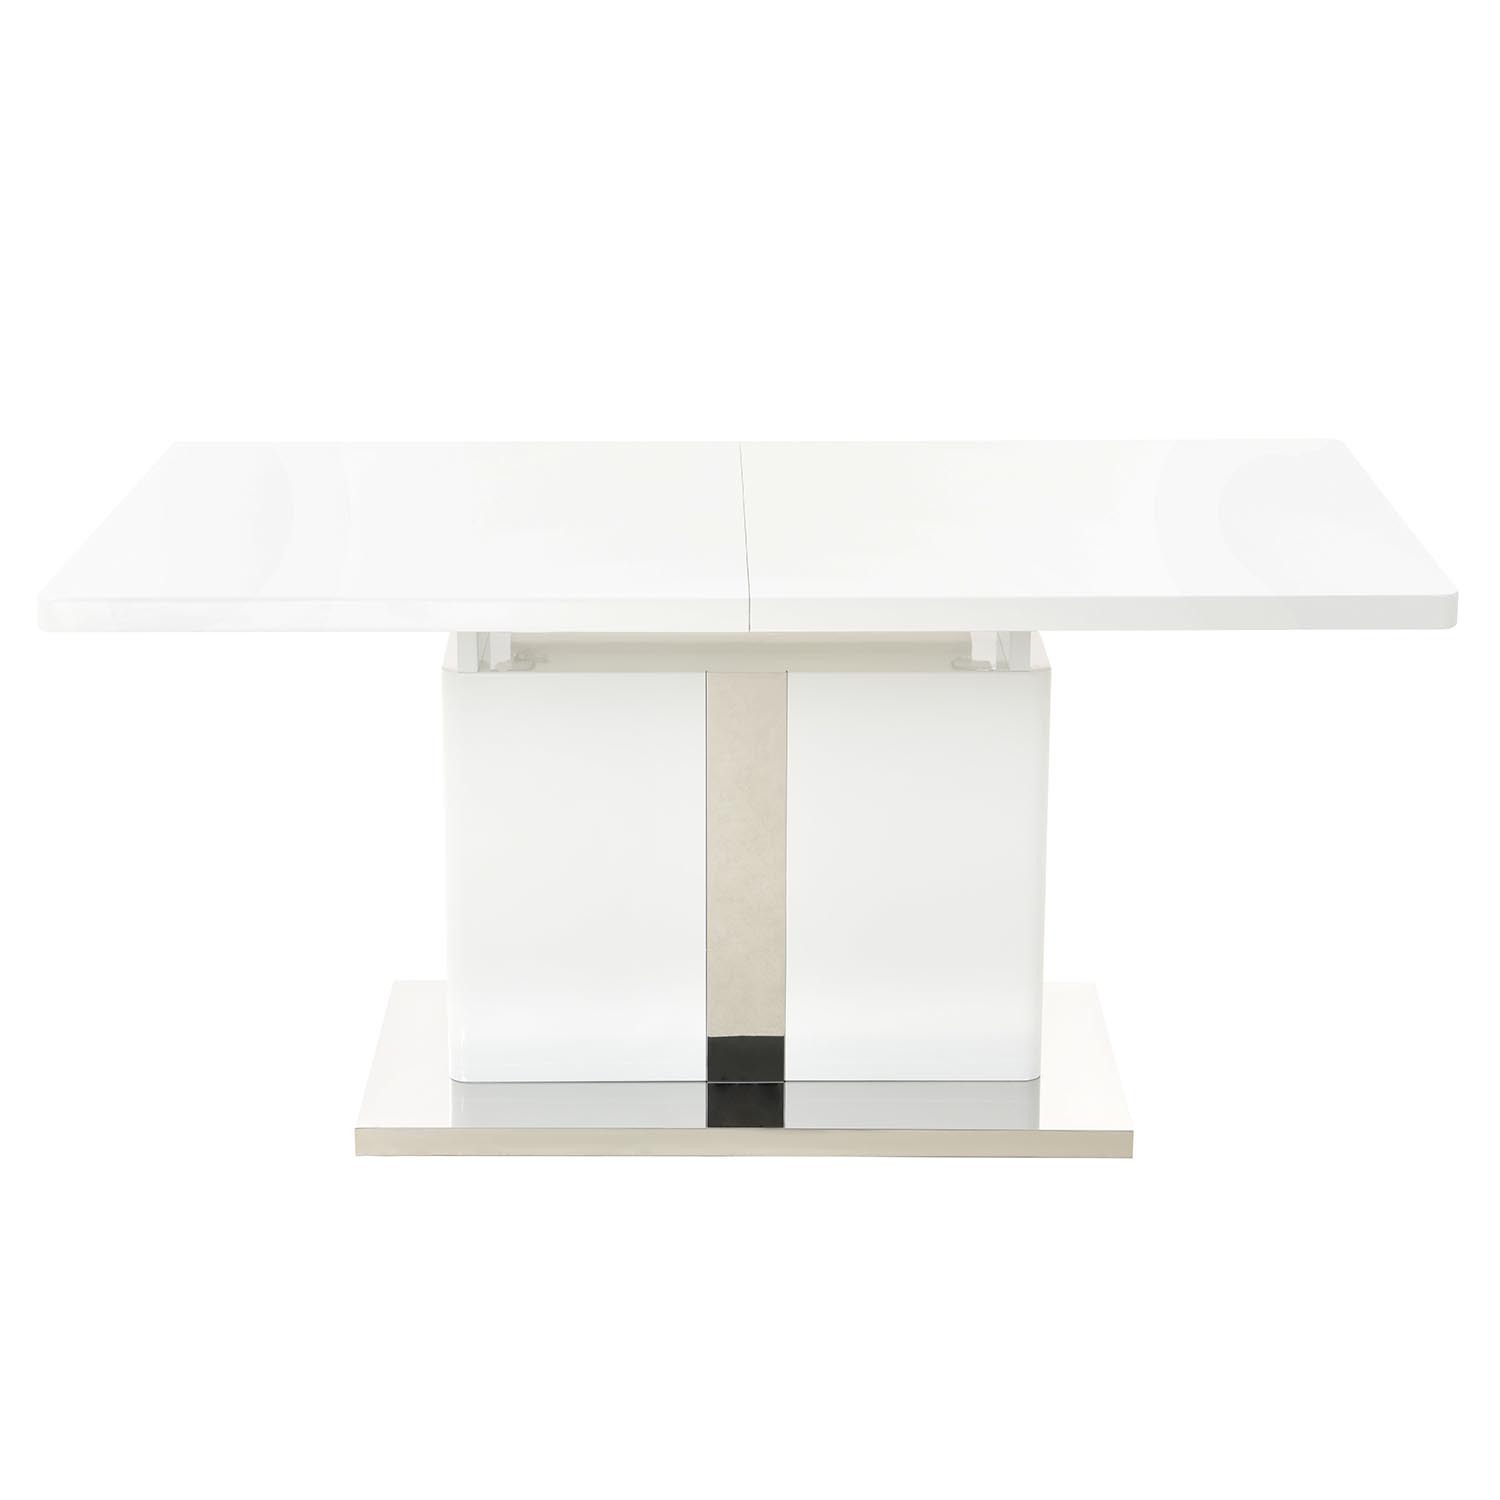 Marcellini 6 Seater 160 to 200cm Extending Table White Image 7